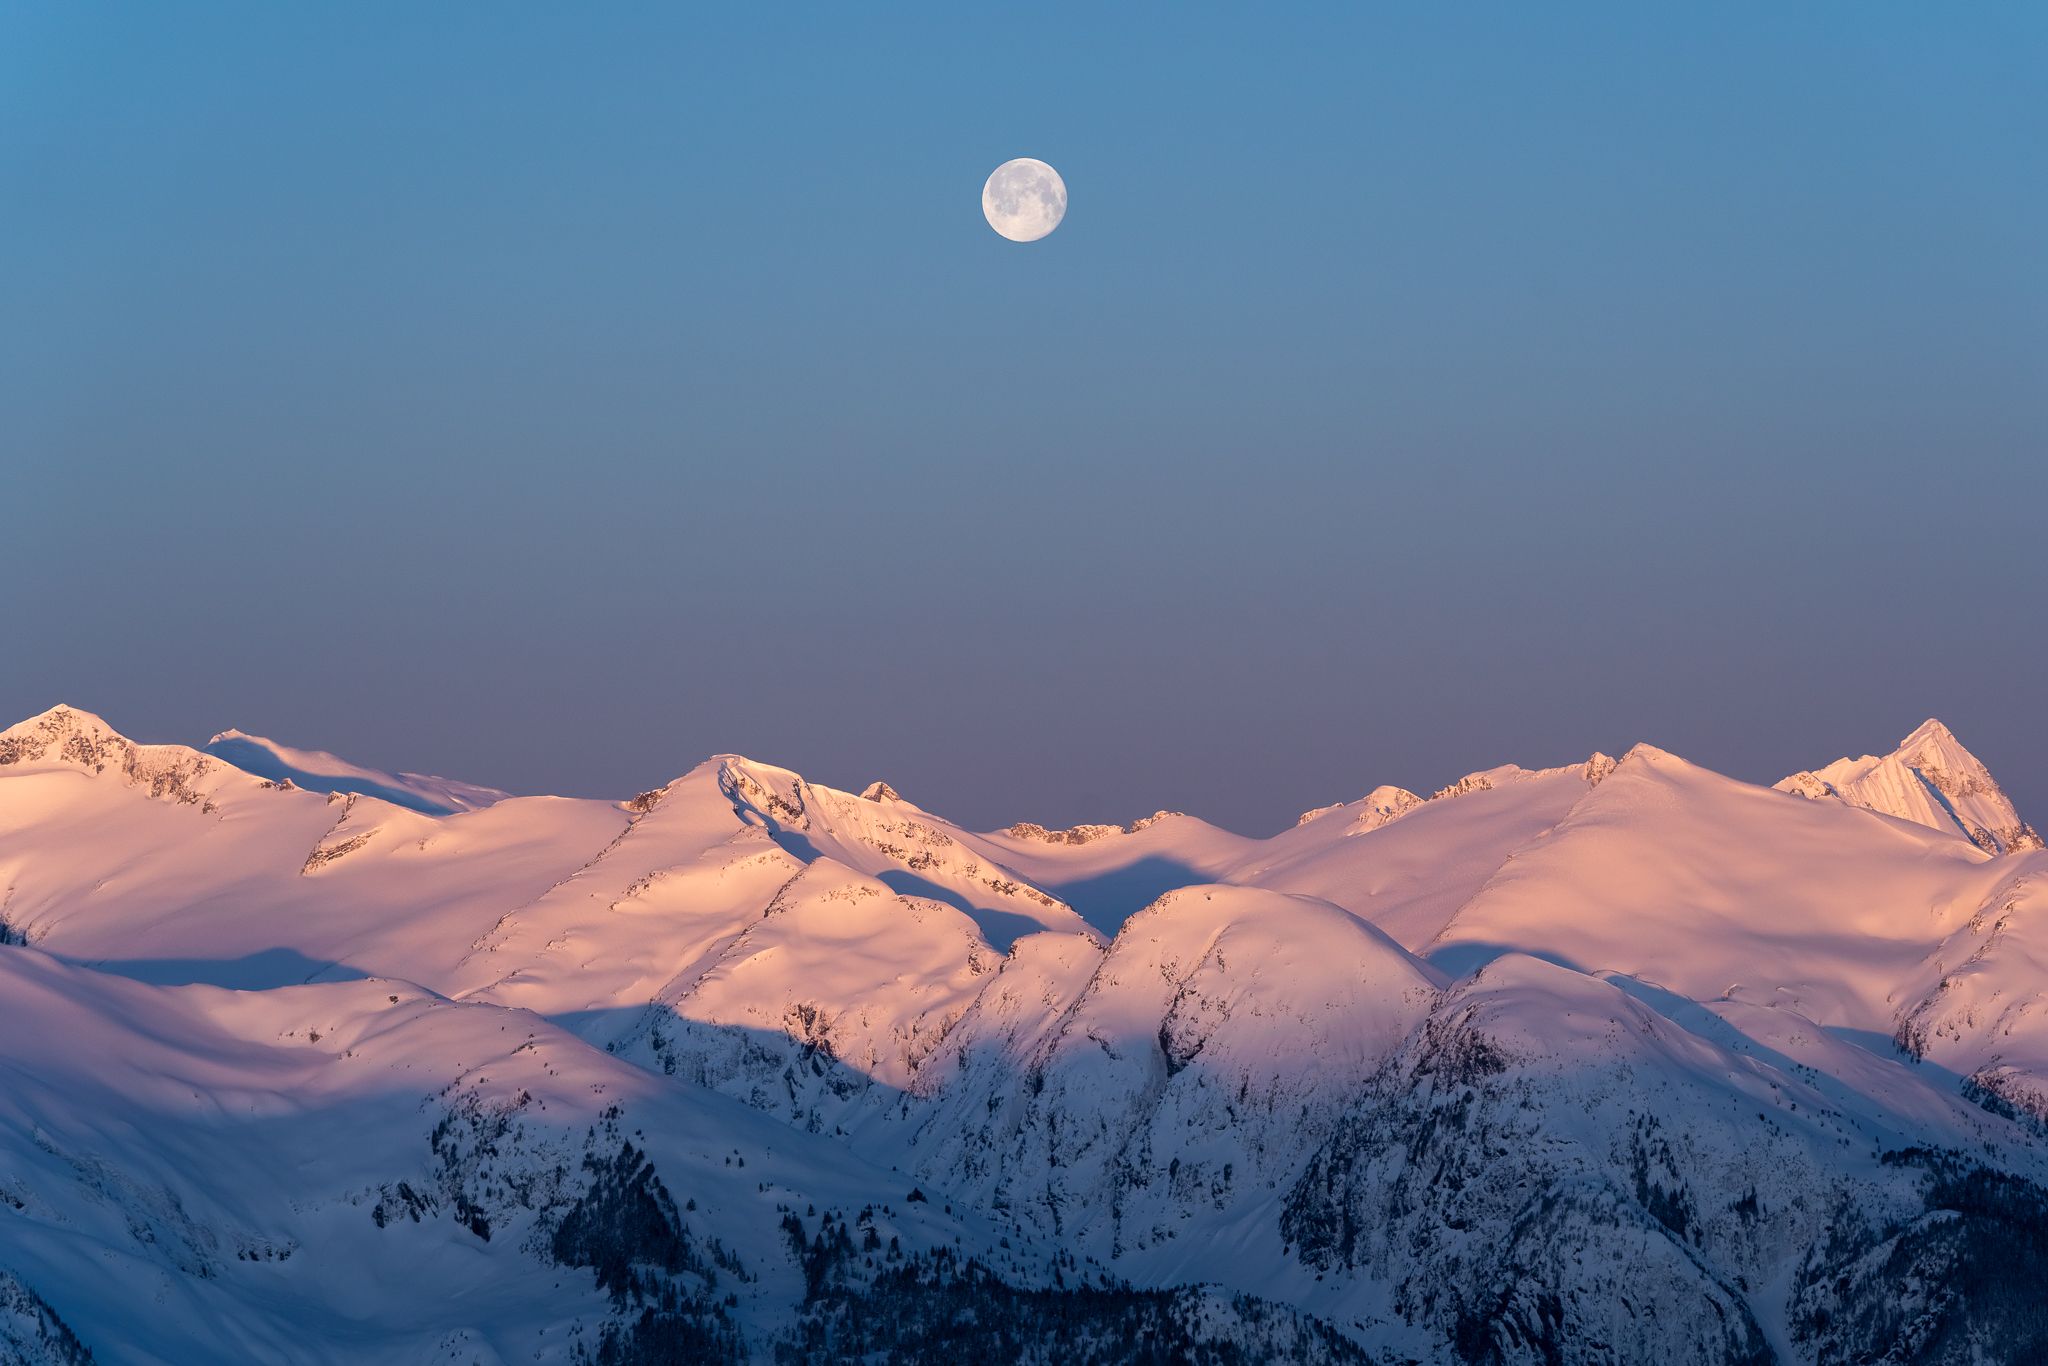 Sun up, moon down in the Whistler backcountry